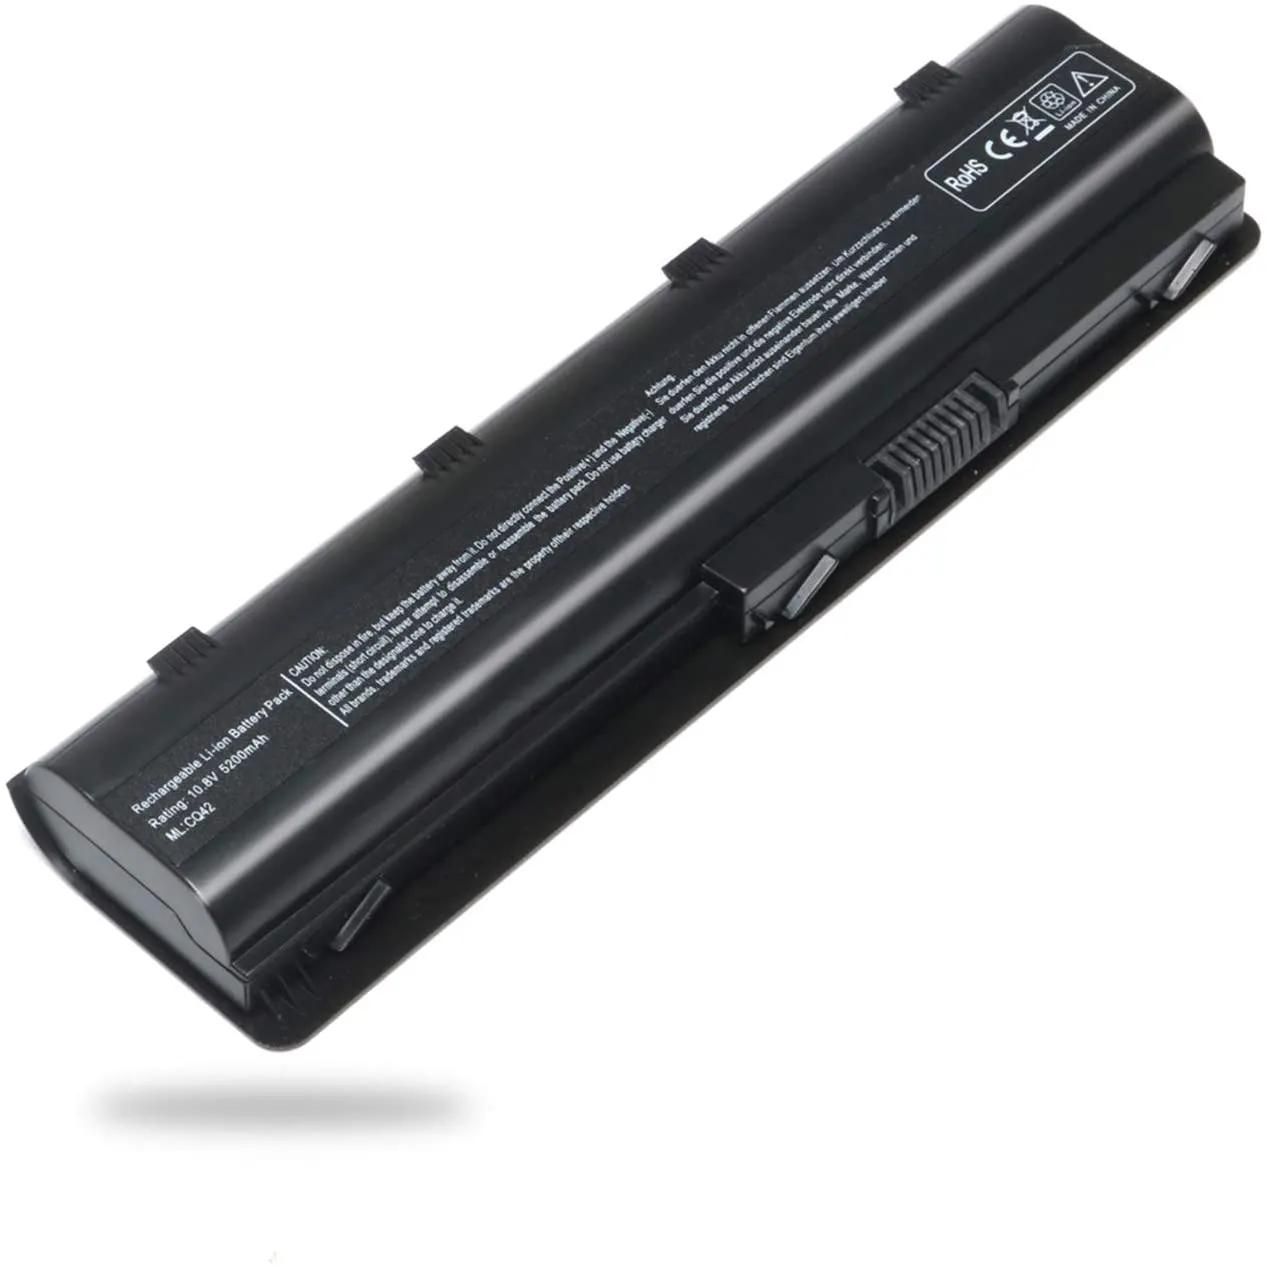 Laptop Battery for HP 2000 Notebook PC